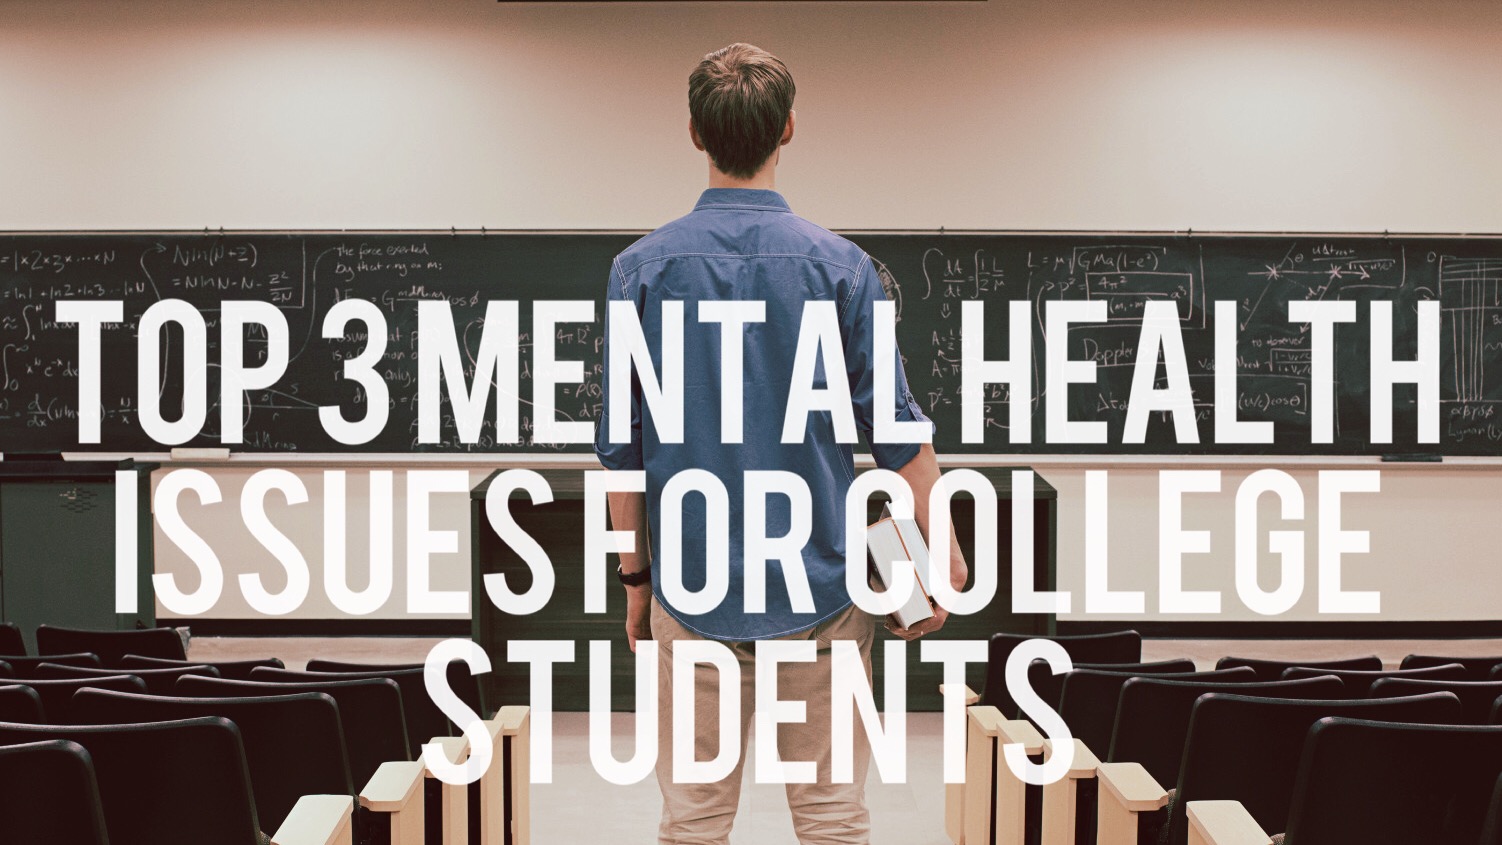 Top 3 Mental Health Issues for College Students